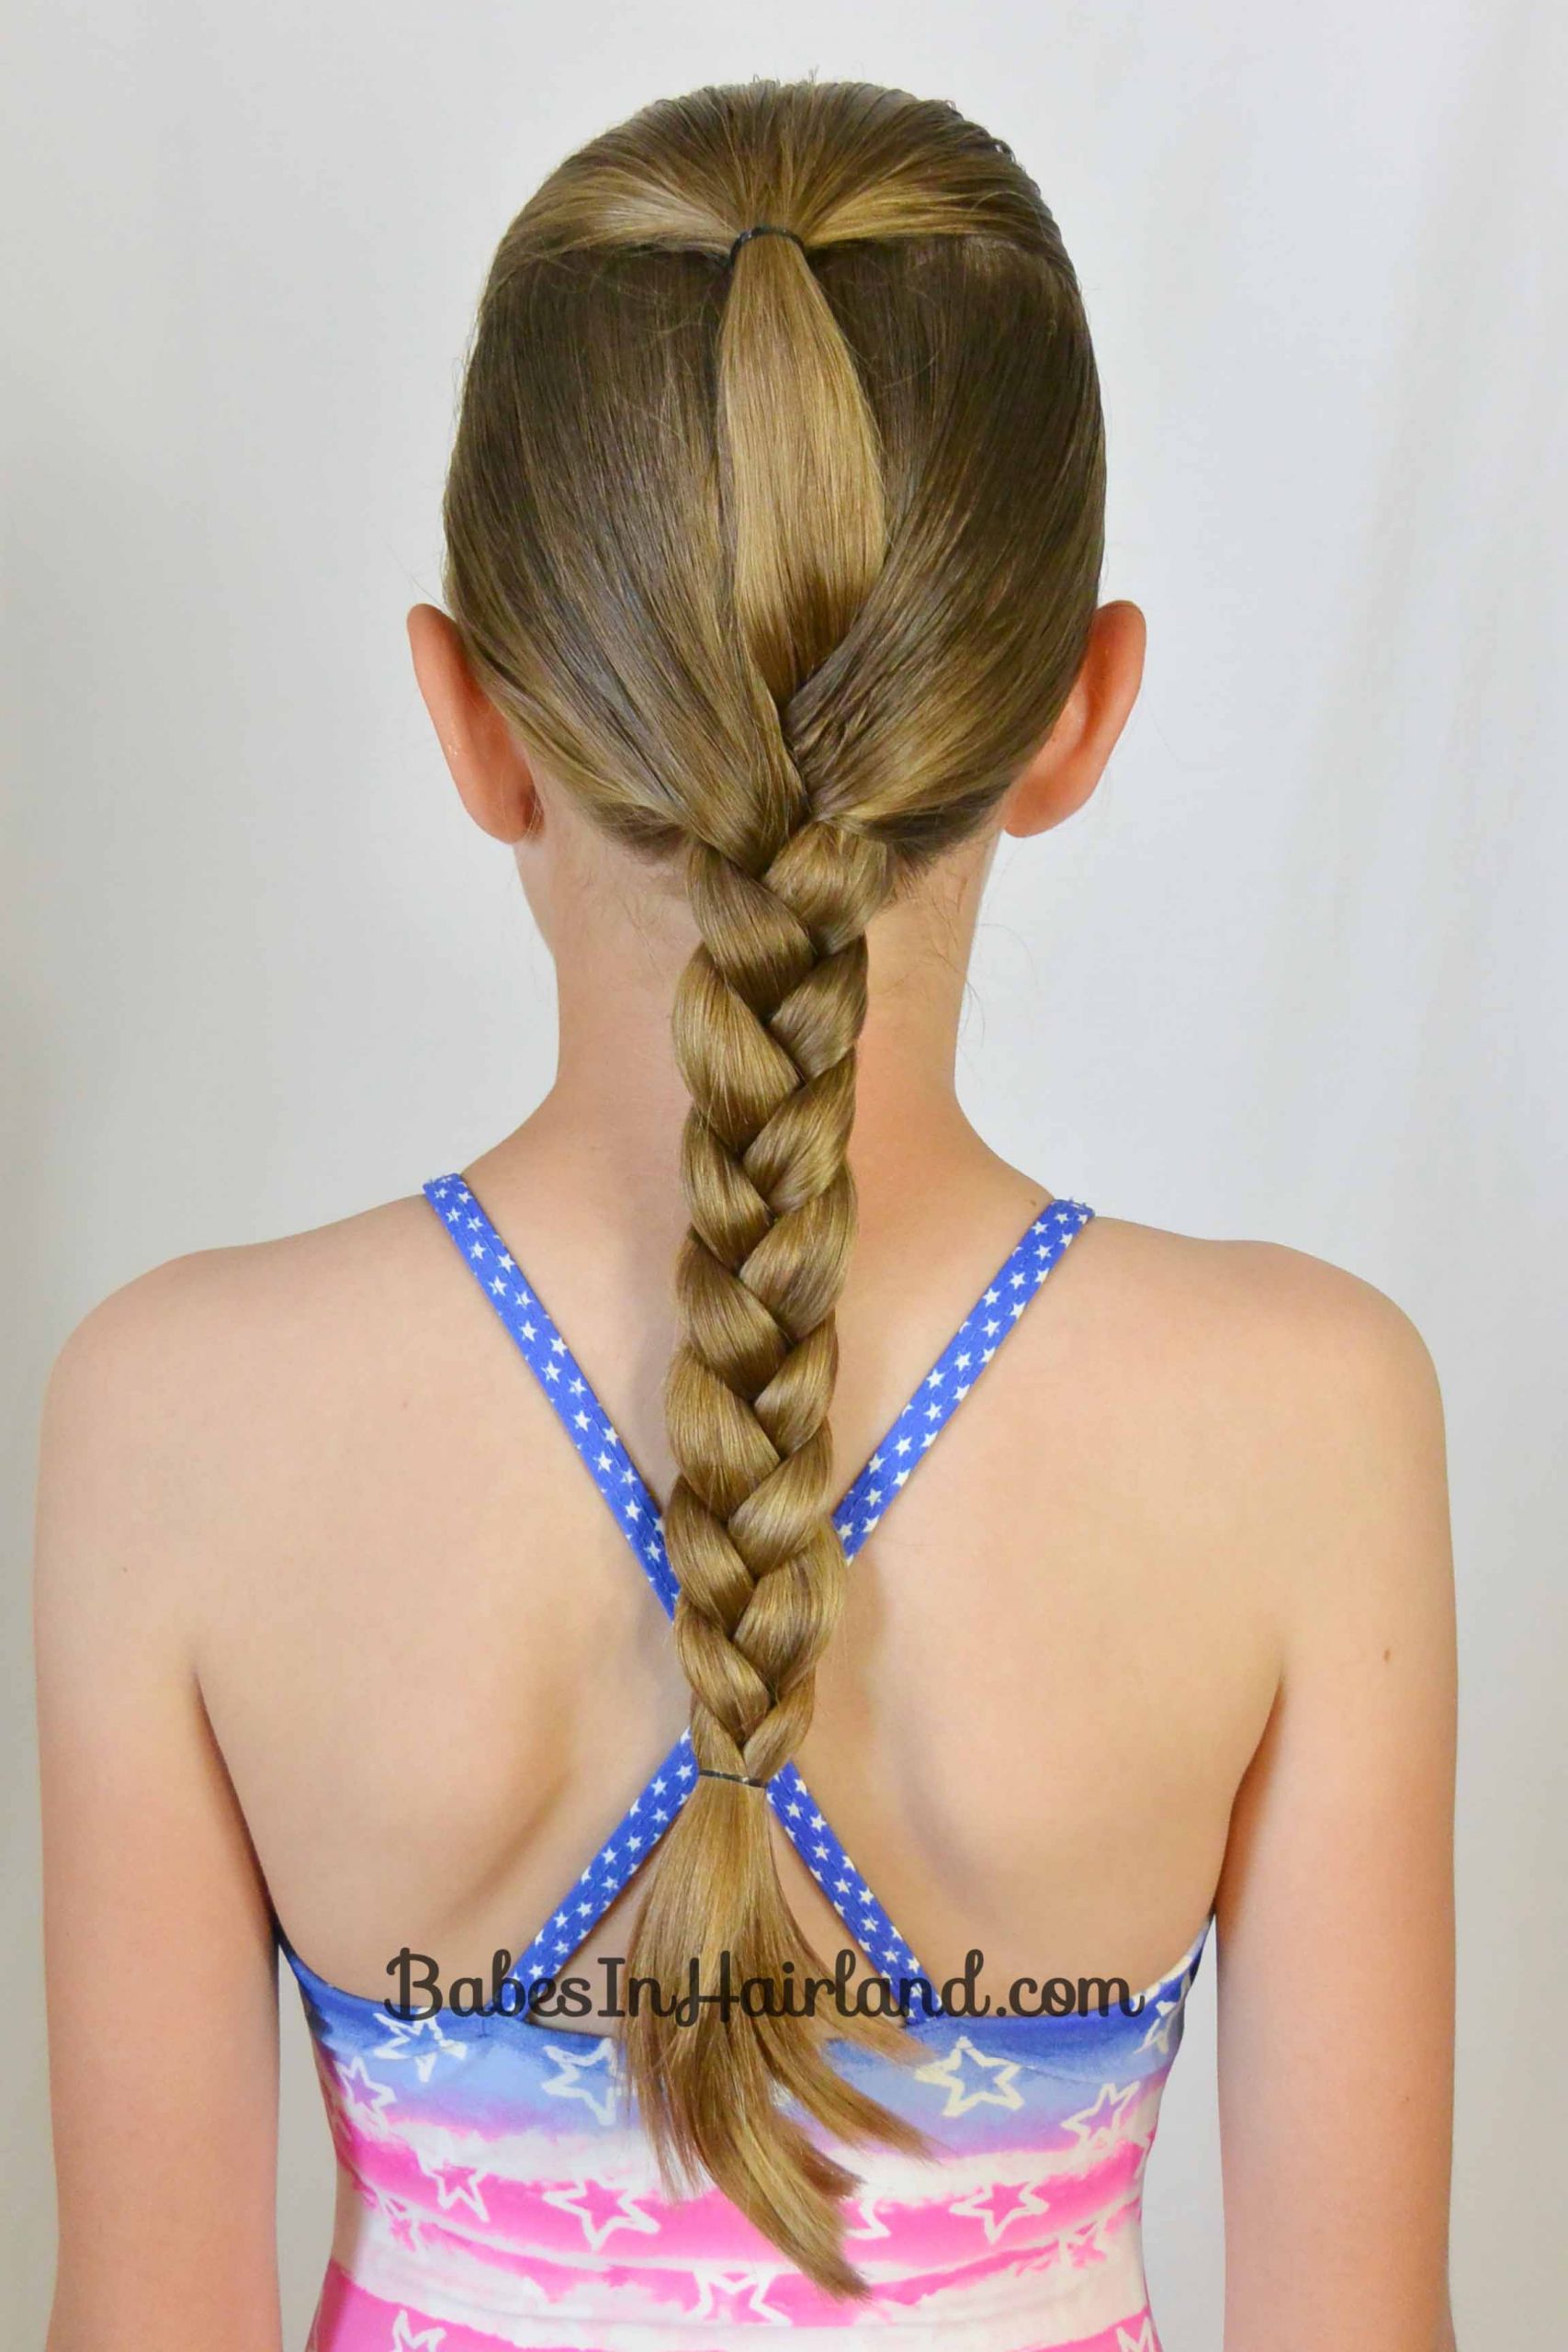 Cute Hairstyles For Swimming
 10 No Fuss Hairstyles for Summer or the Pool Babes In